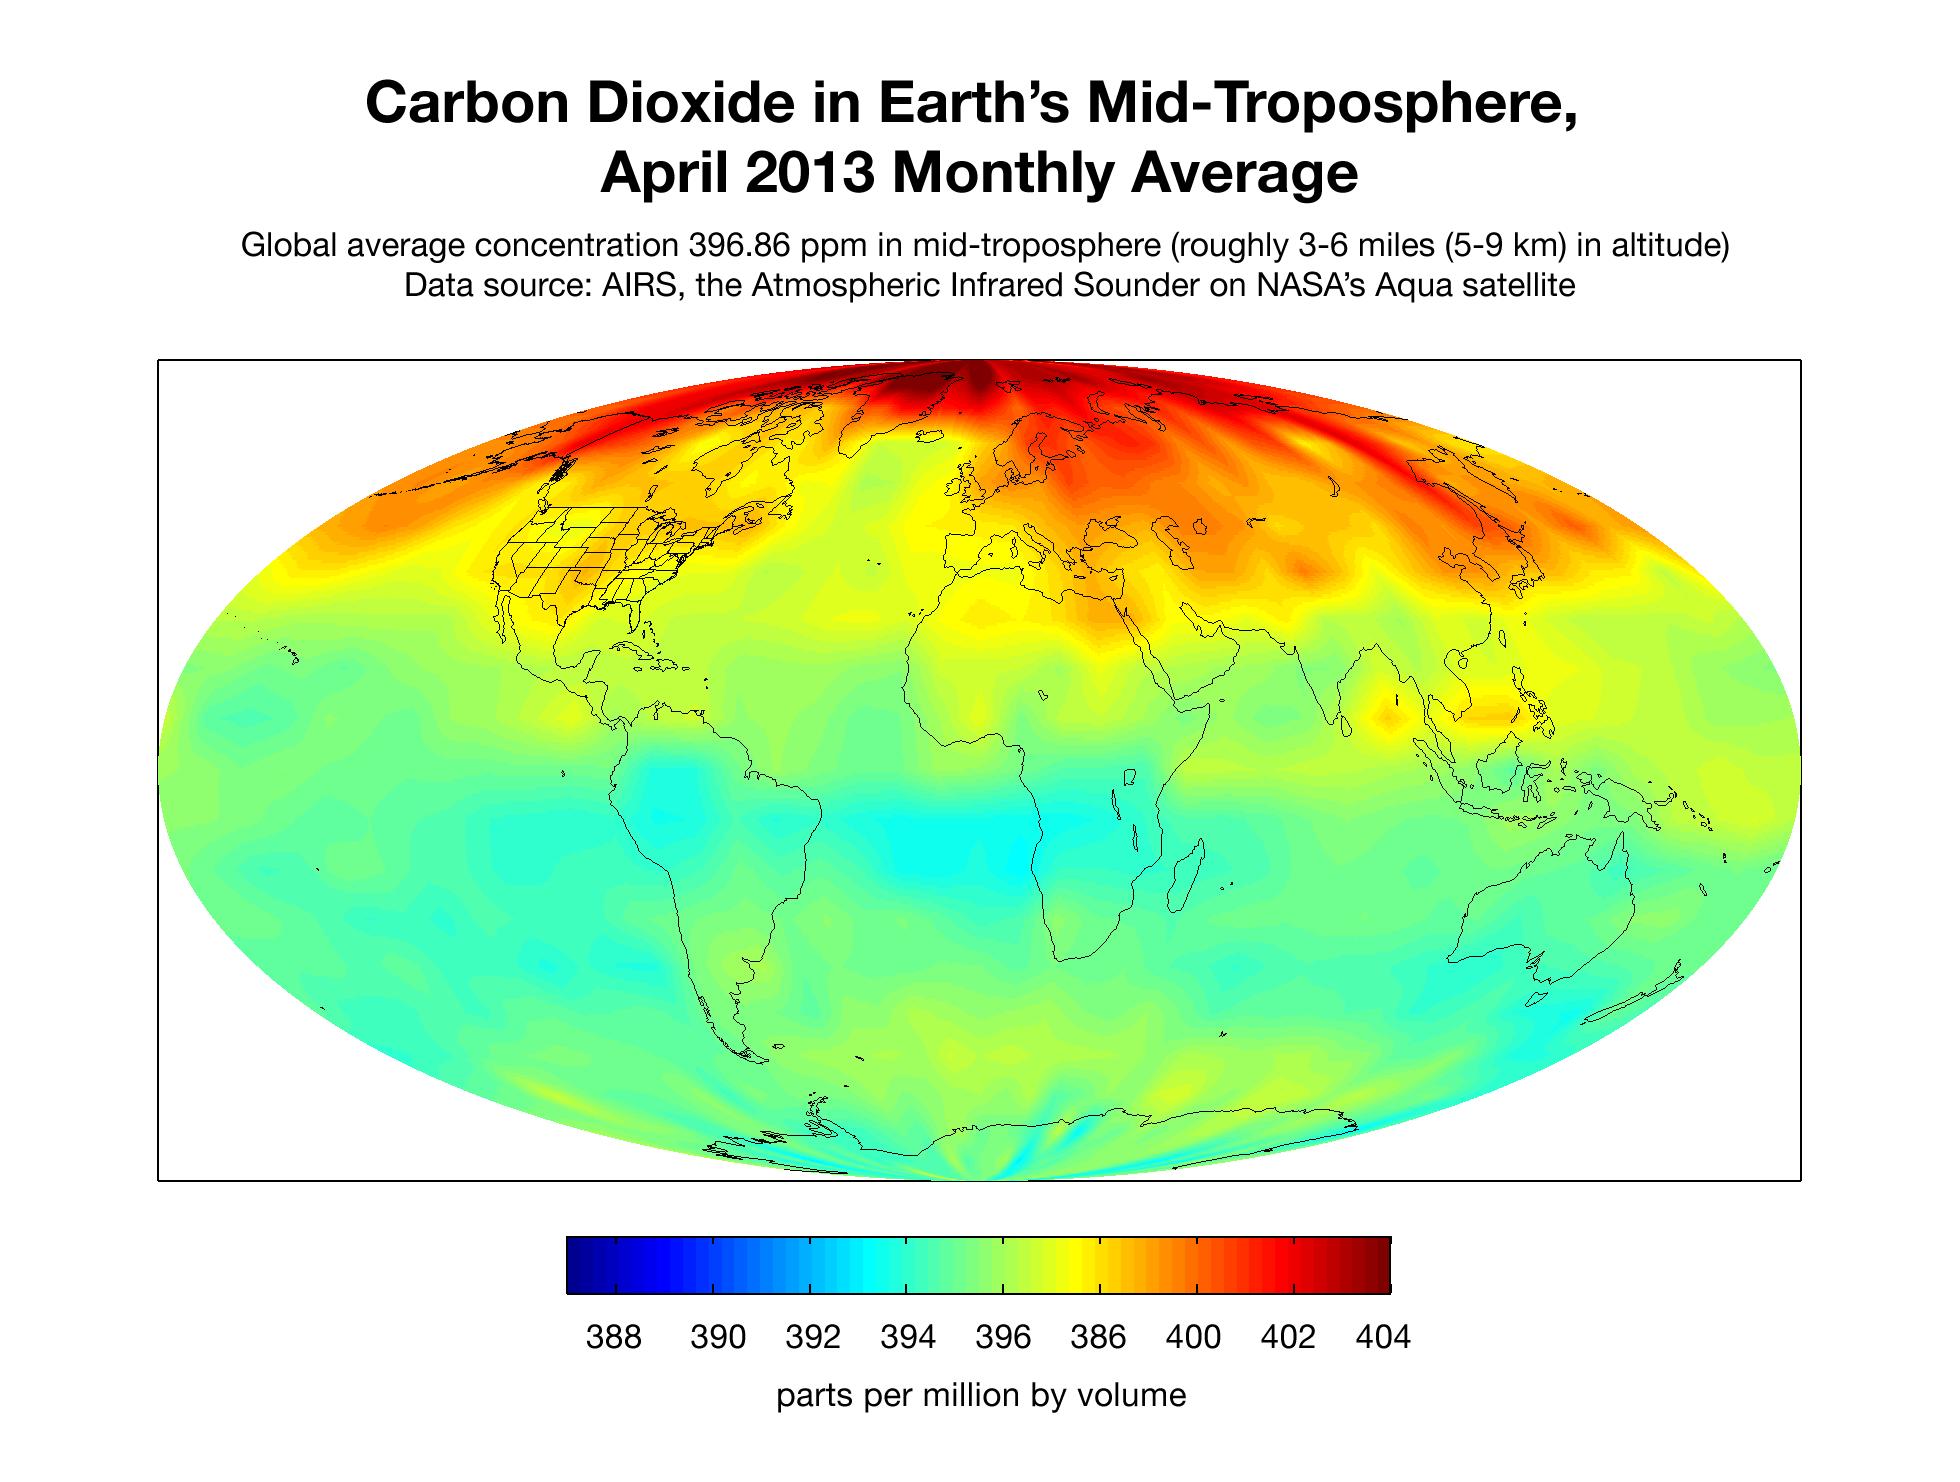 Carbon Dioxide in Earth's Mid-Troposphere, April 2013 Monthly Average